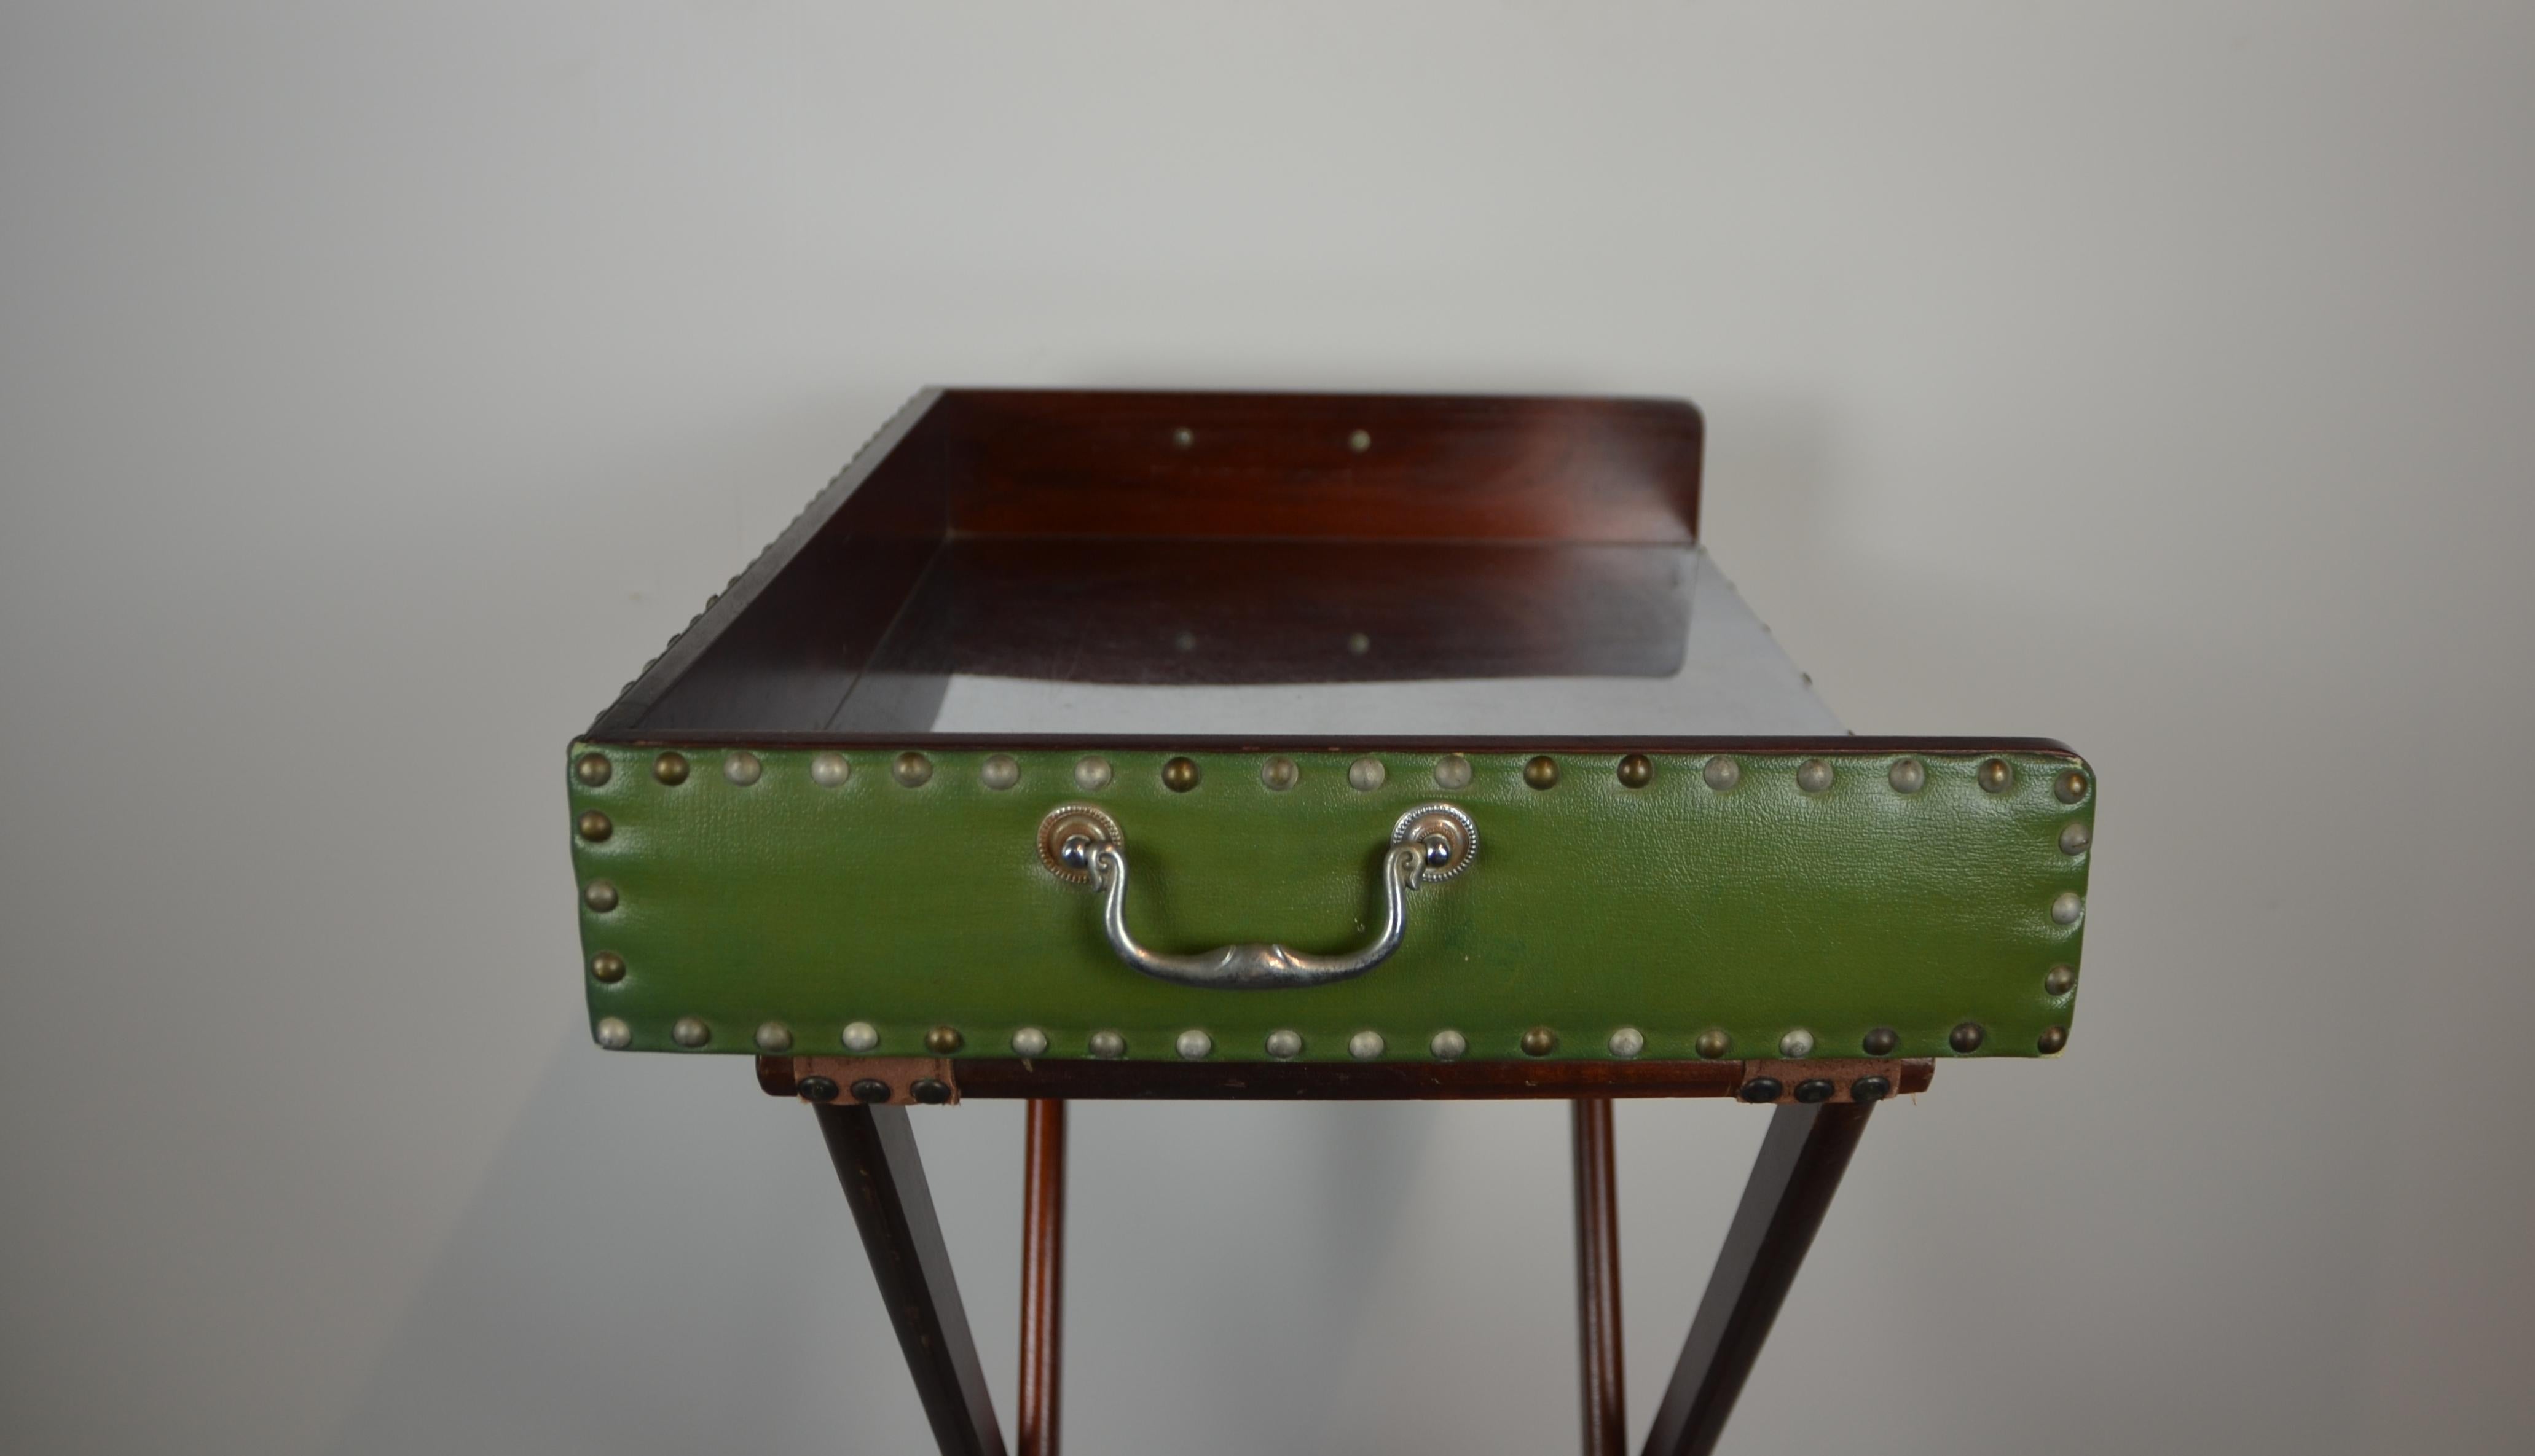 Butler's tray with stand. The sides are covered in green faux-leather and silver metal. The stand is mahogany with two straps.